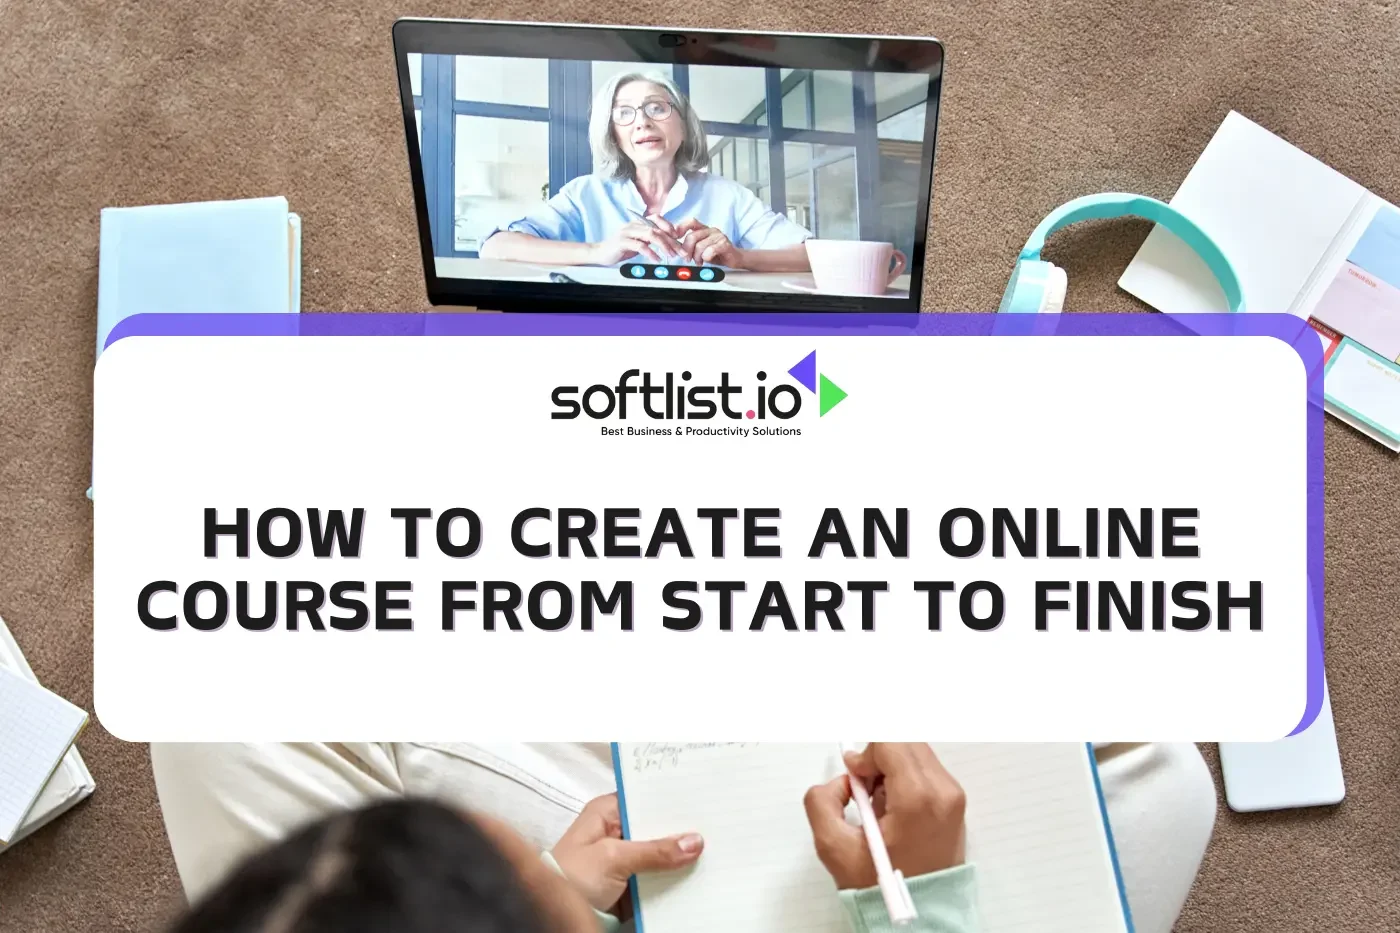 How to Create an Online Course from Start to Finish